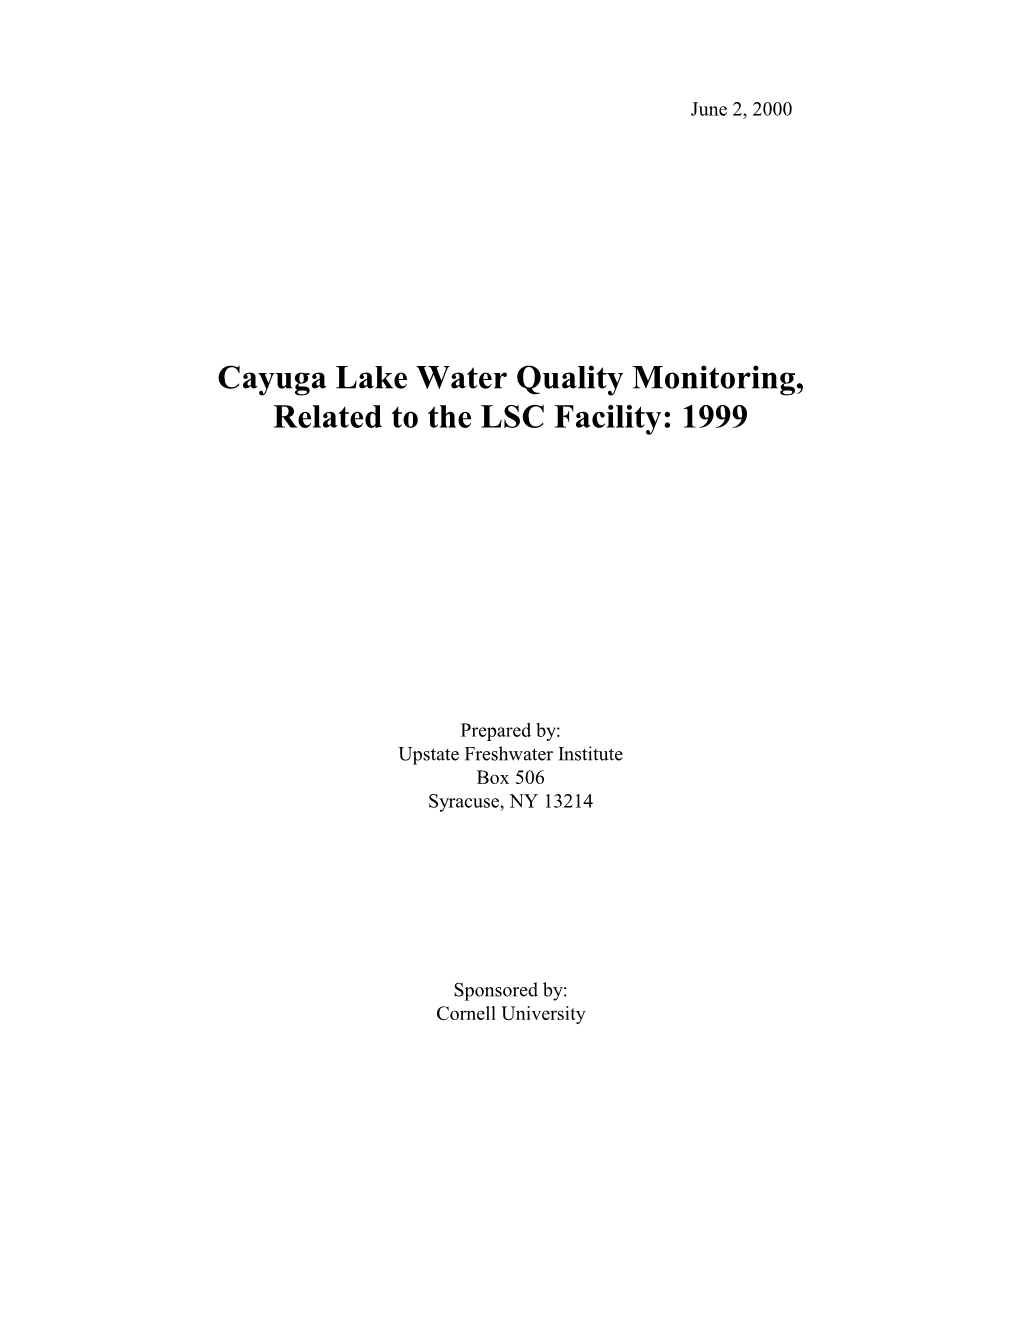 Cayuga Lake Water Quality Monitoring, Related to the LSC Facility: 1999